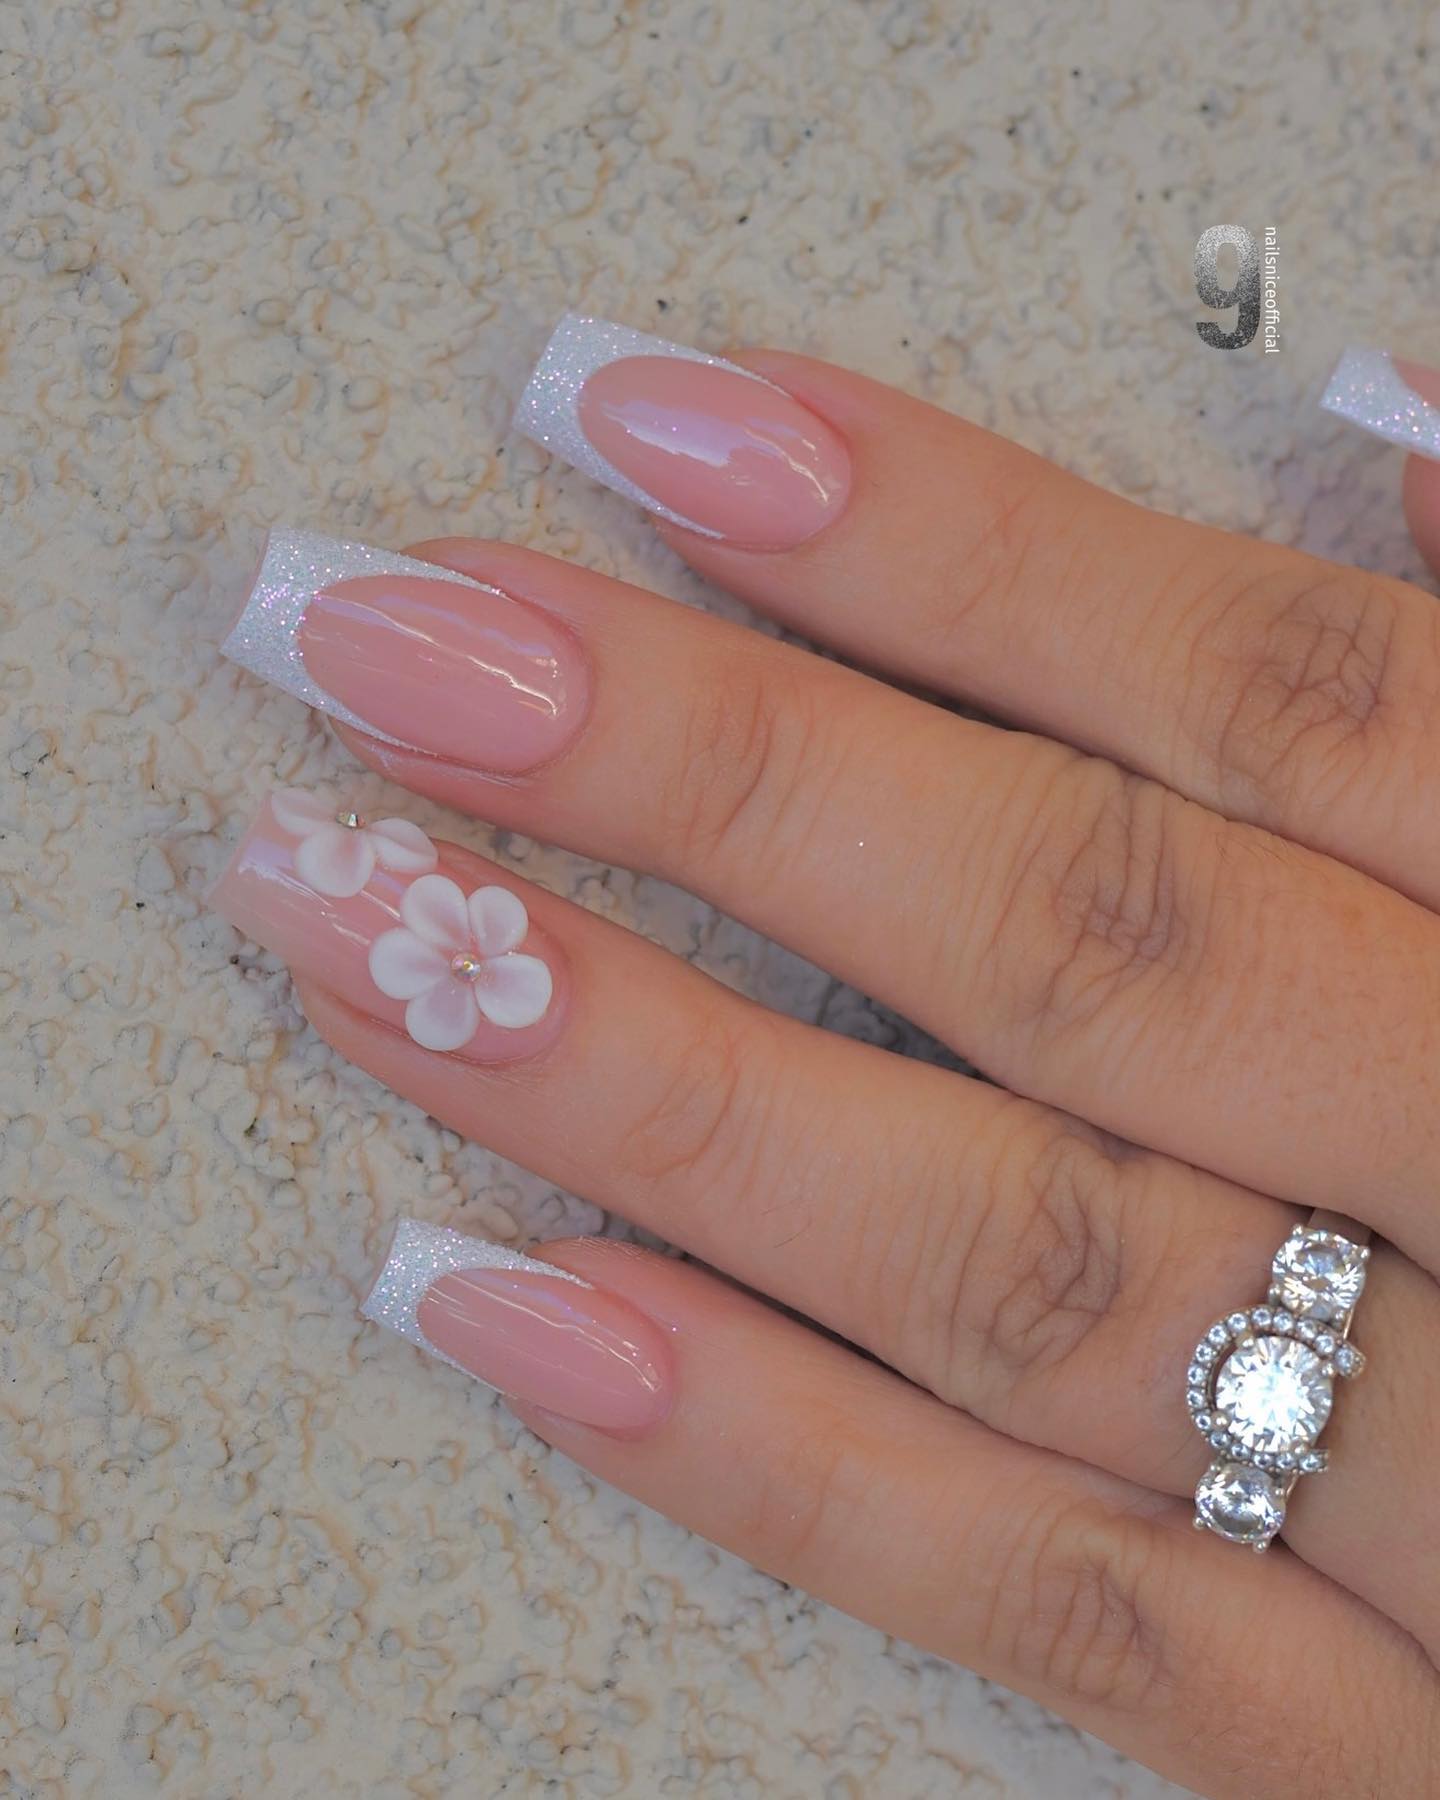 Can you see how glamorous these nails look with a wedding ring? Your gorgeous ring deserves a glittered French mani, so go for it as soon as possible. Daisy stickers add an extra beauty, too.